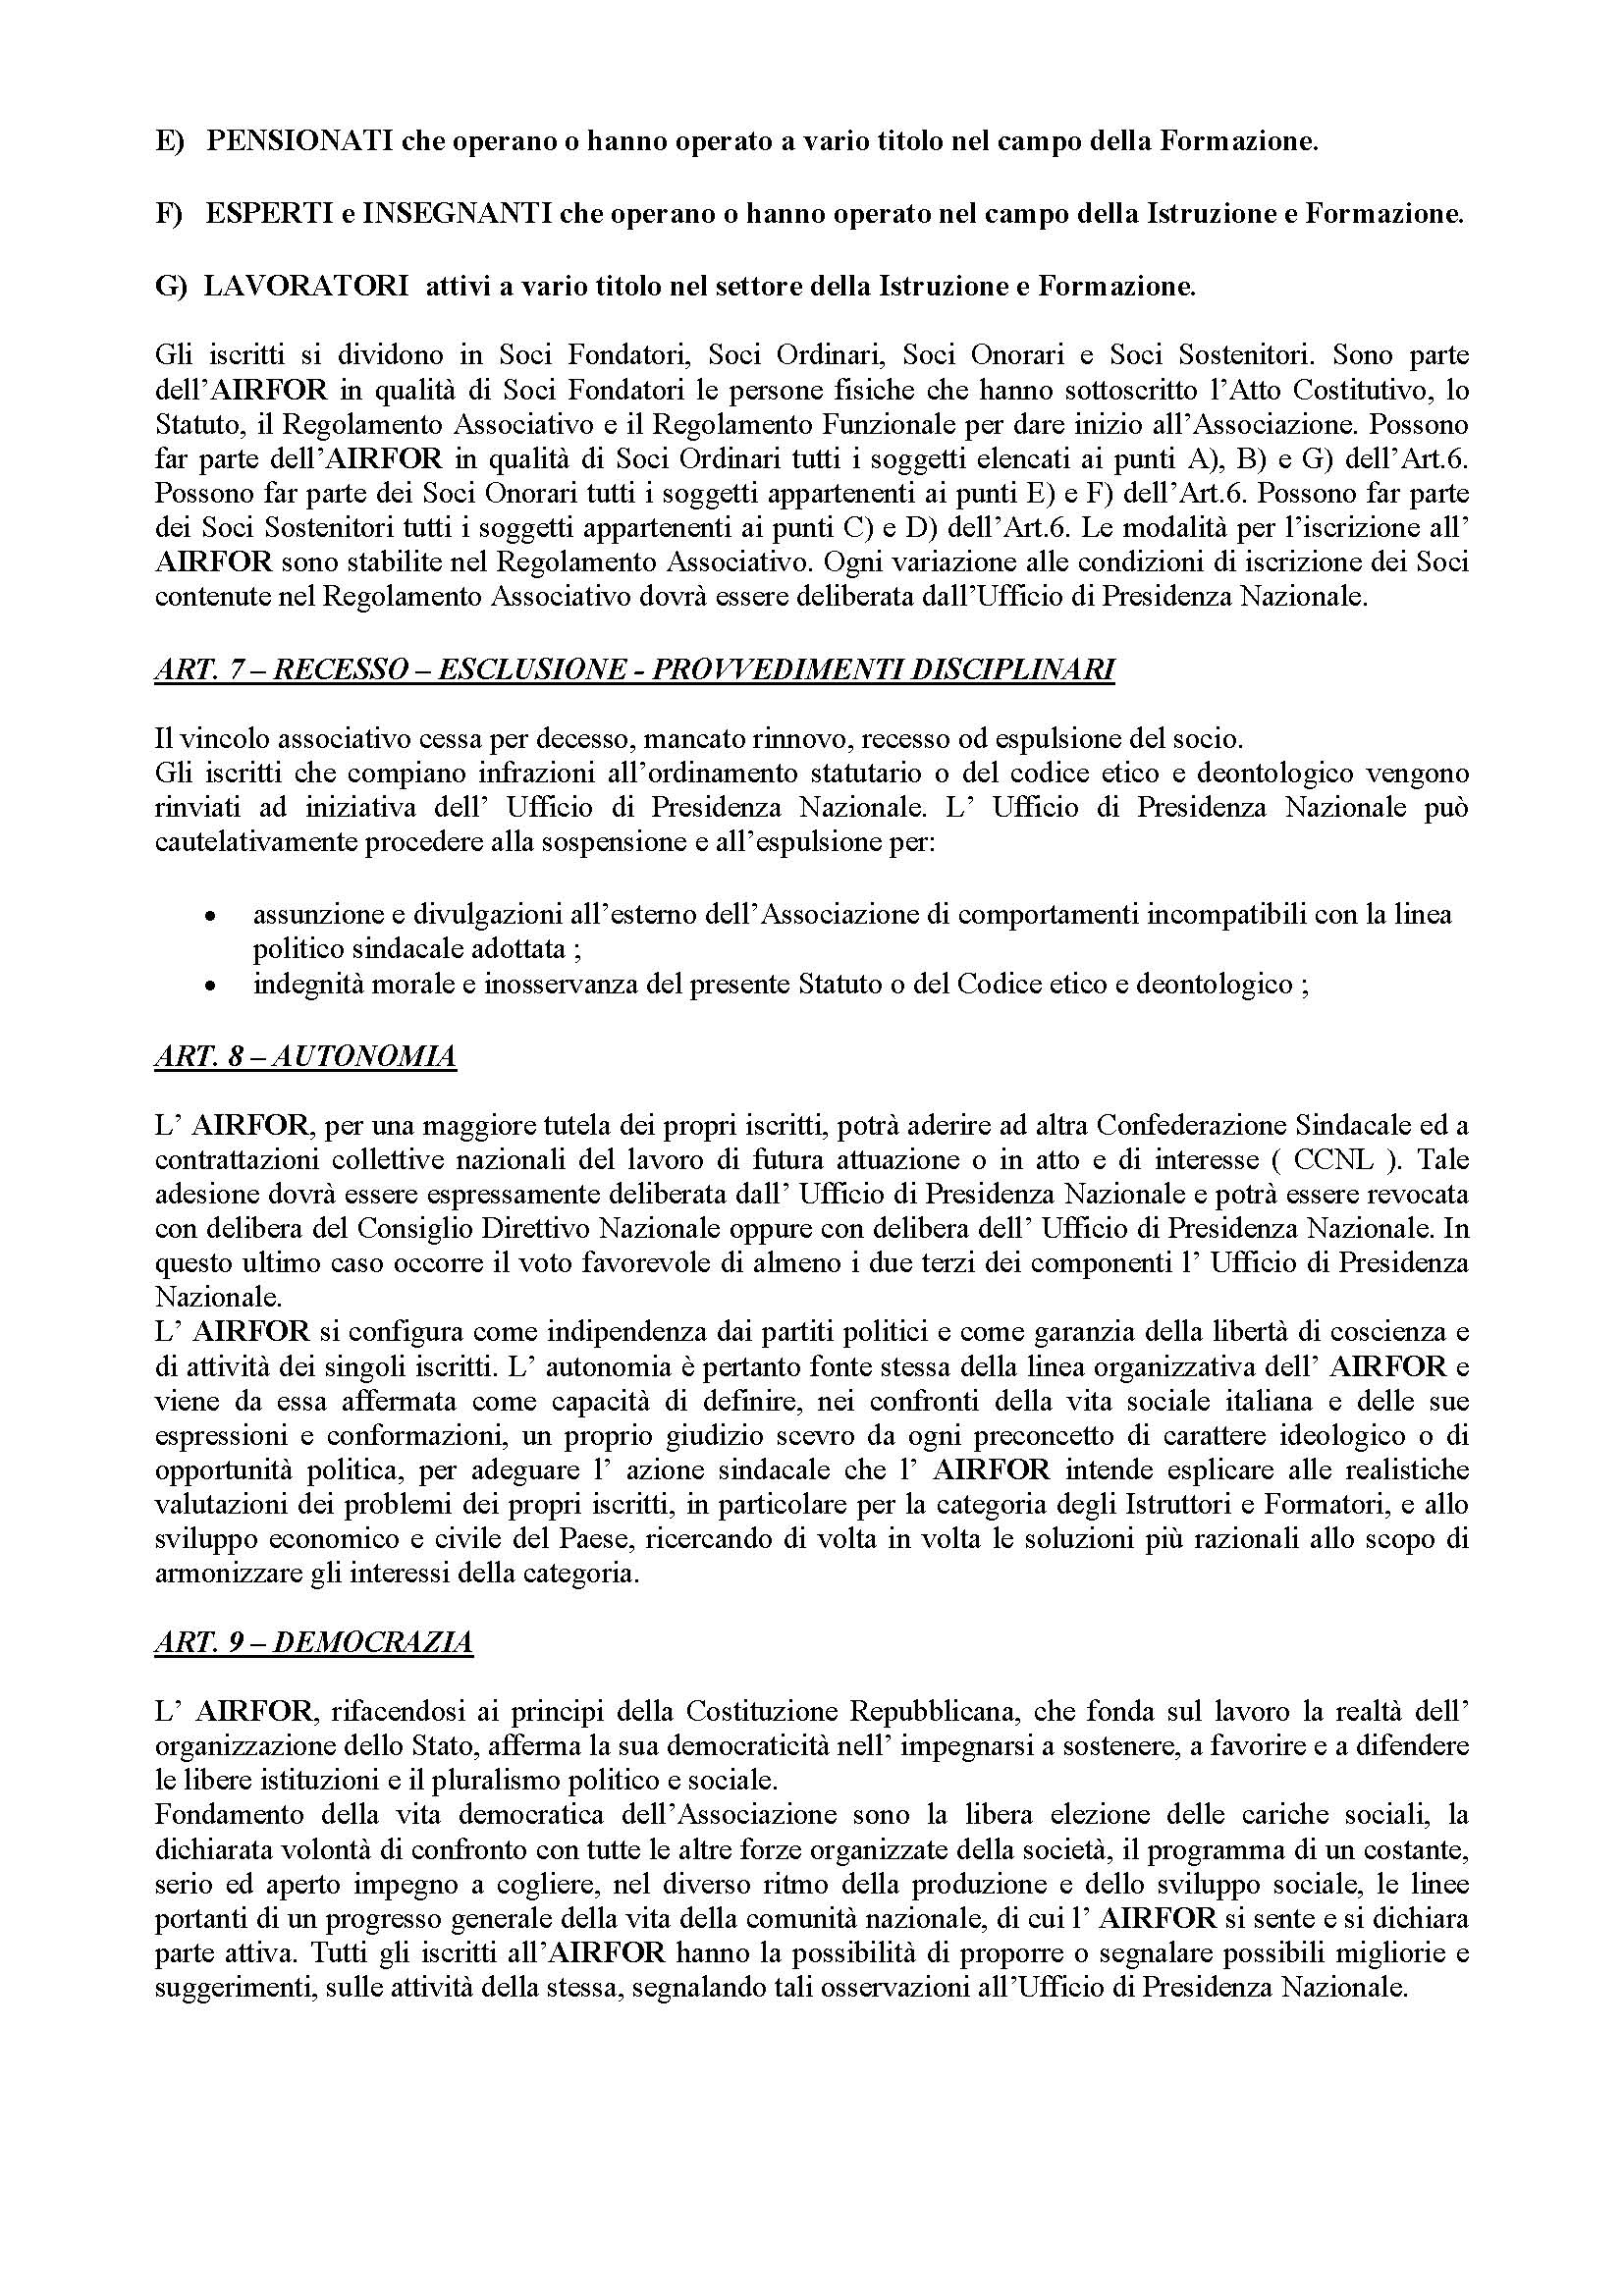 Abstract_Statuto_AIRFOR_Pagina_3